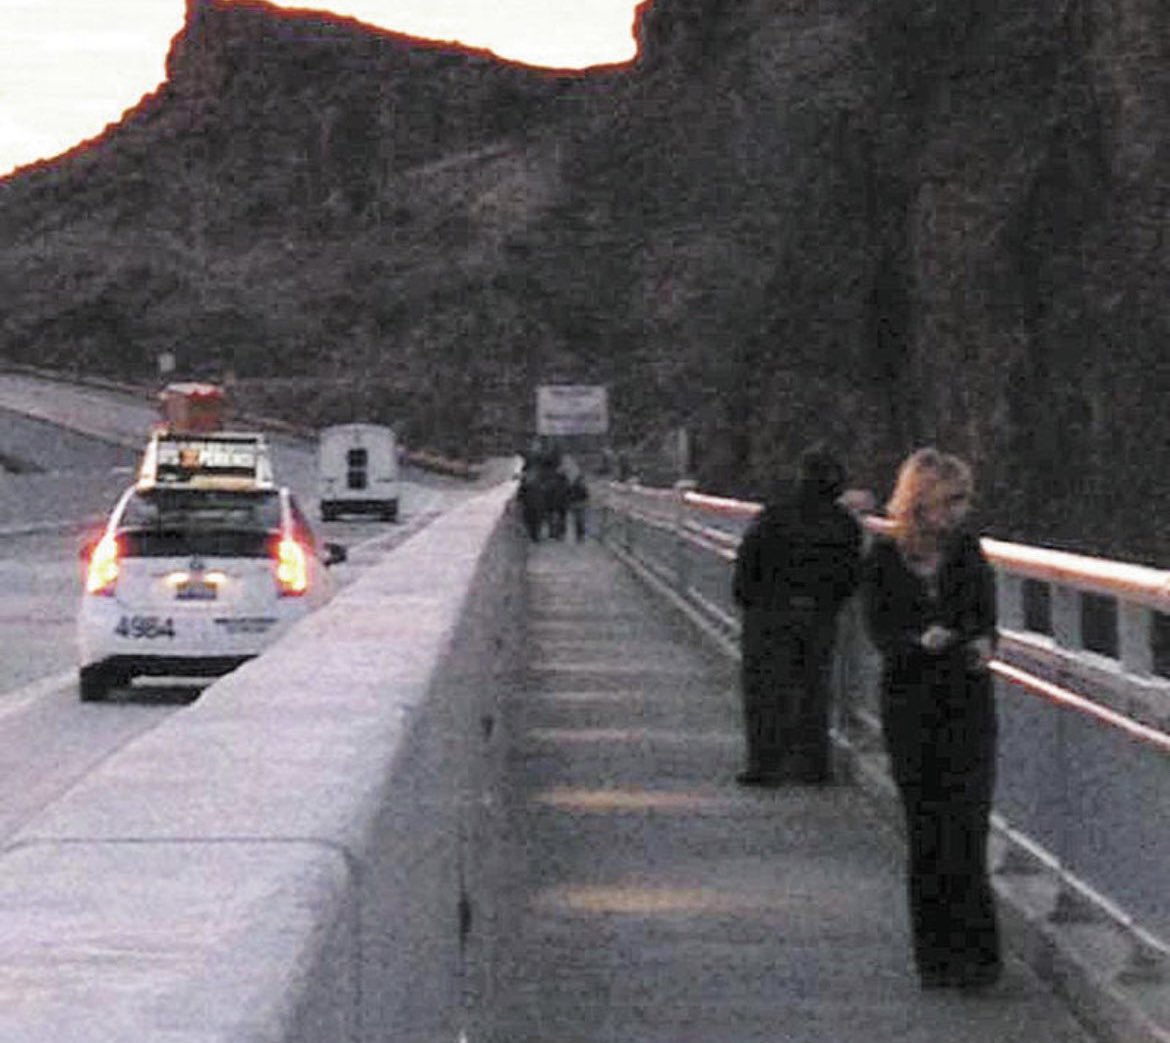 The last photo of Heather Price Papayoti shows her looking over the Hoover Dam bypass bridge on January 16, 2014. Just moments later, she jumped over the railing and ended her own life.